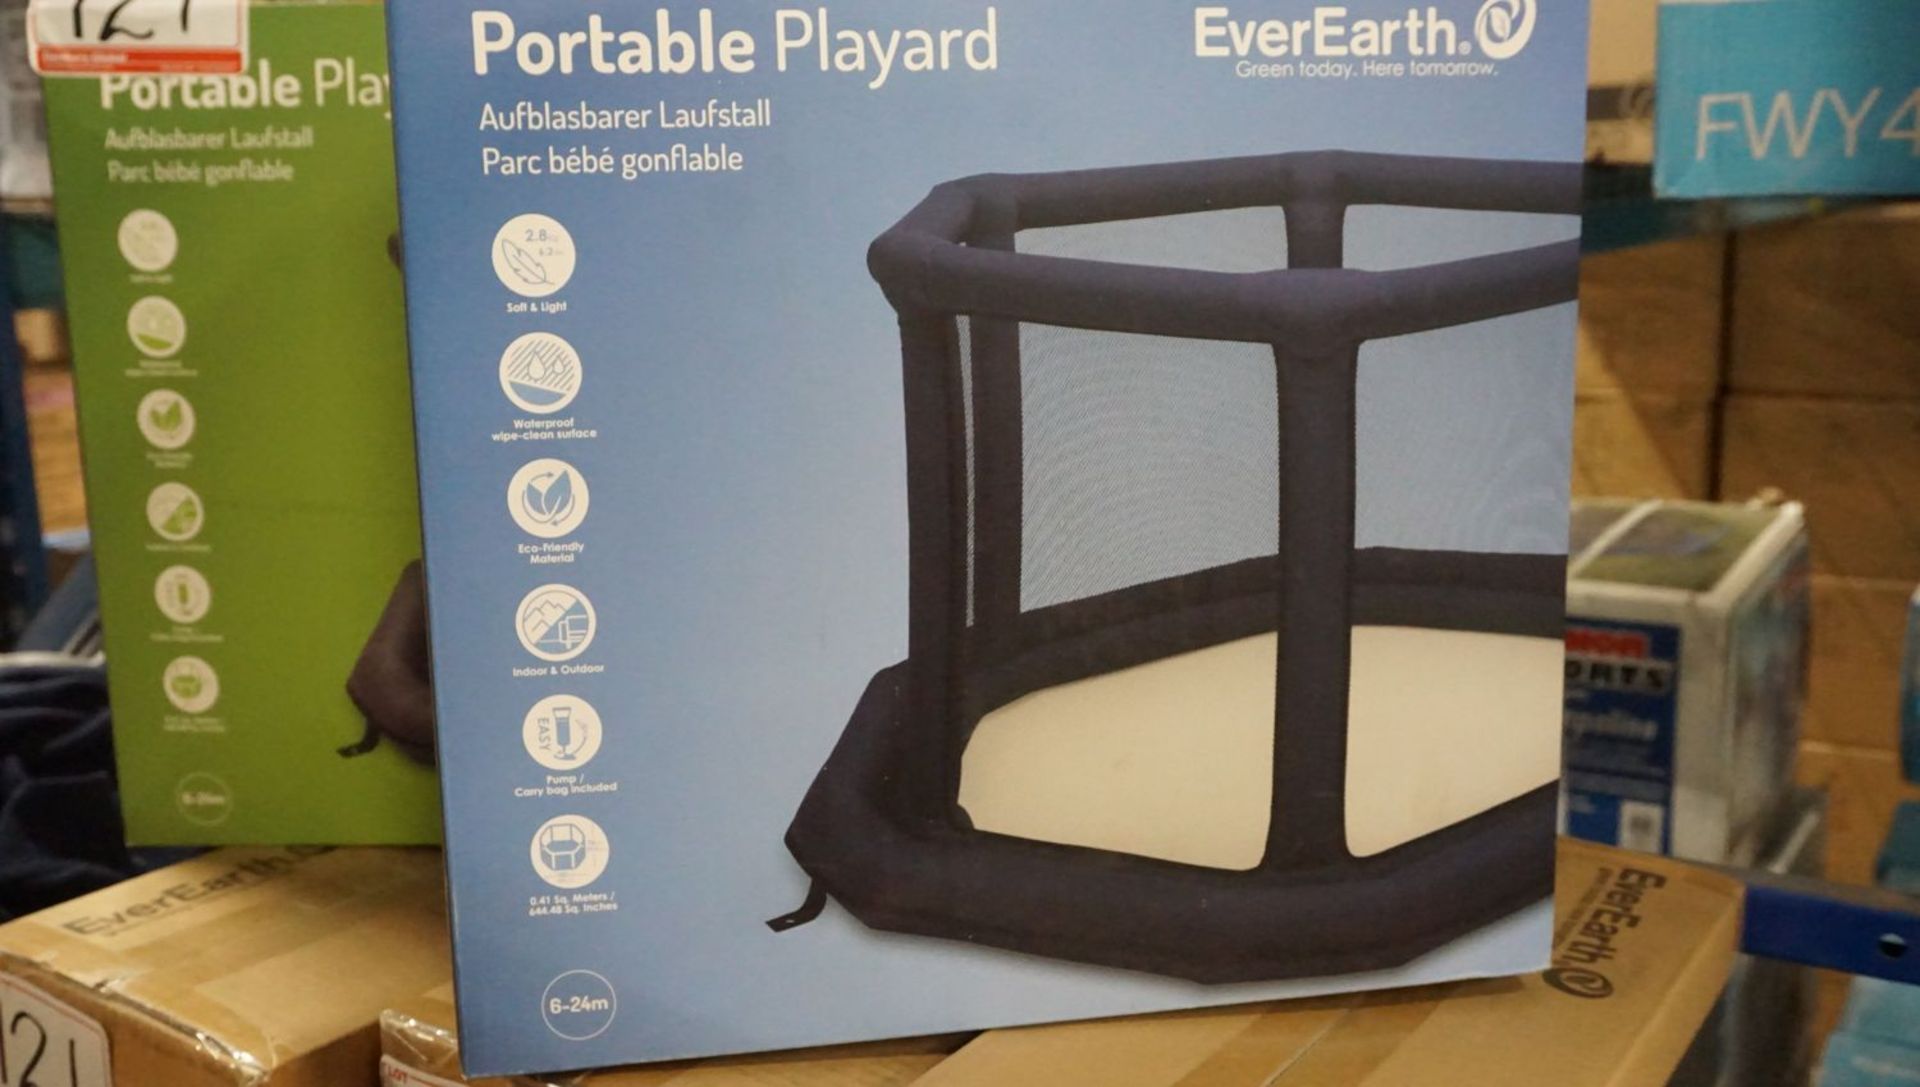 UNITS - EVEREARTH PORTABLE PLAYARD FOR BABY, INFANTS, & TODDLERS (EE33784) (MSRP $160)